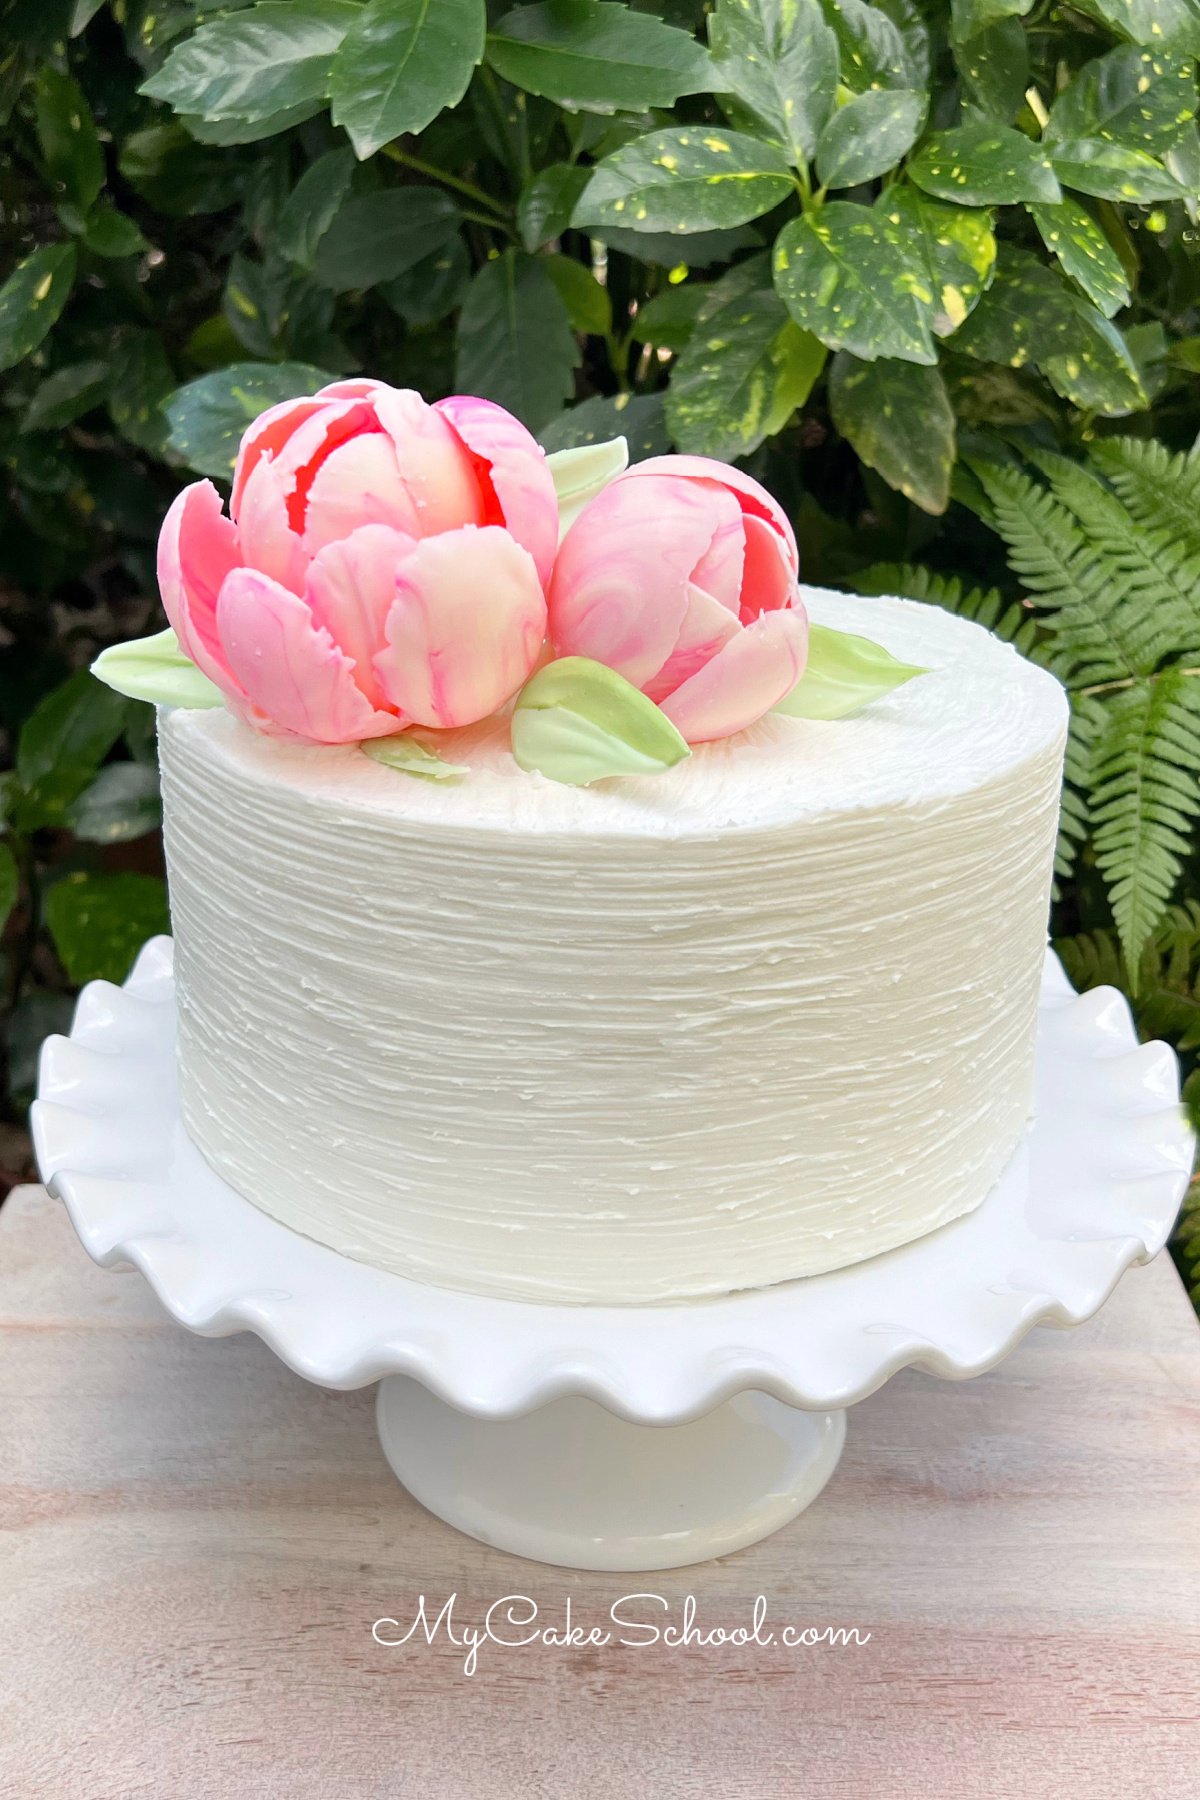 Cake frosted in vanilla buttercream, topped with two large pink chocolate flowers.